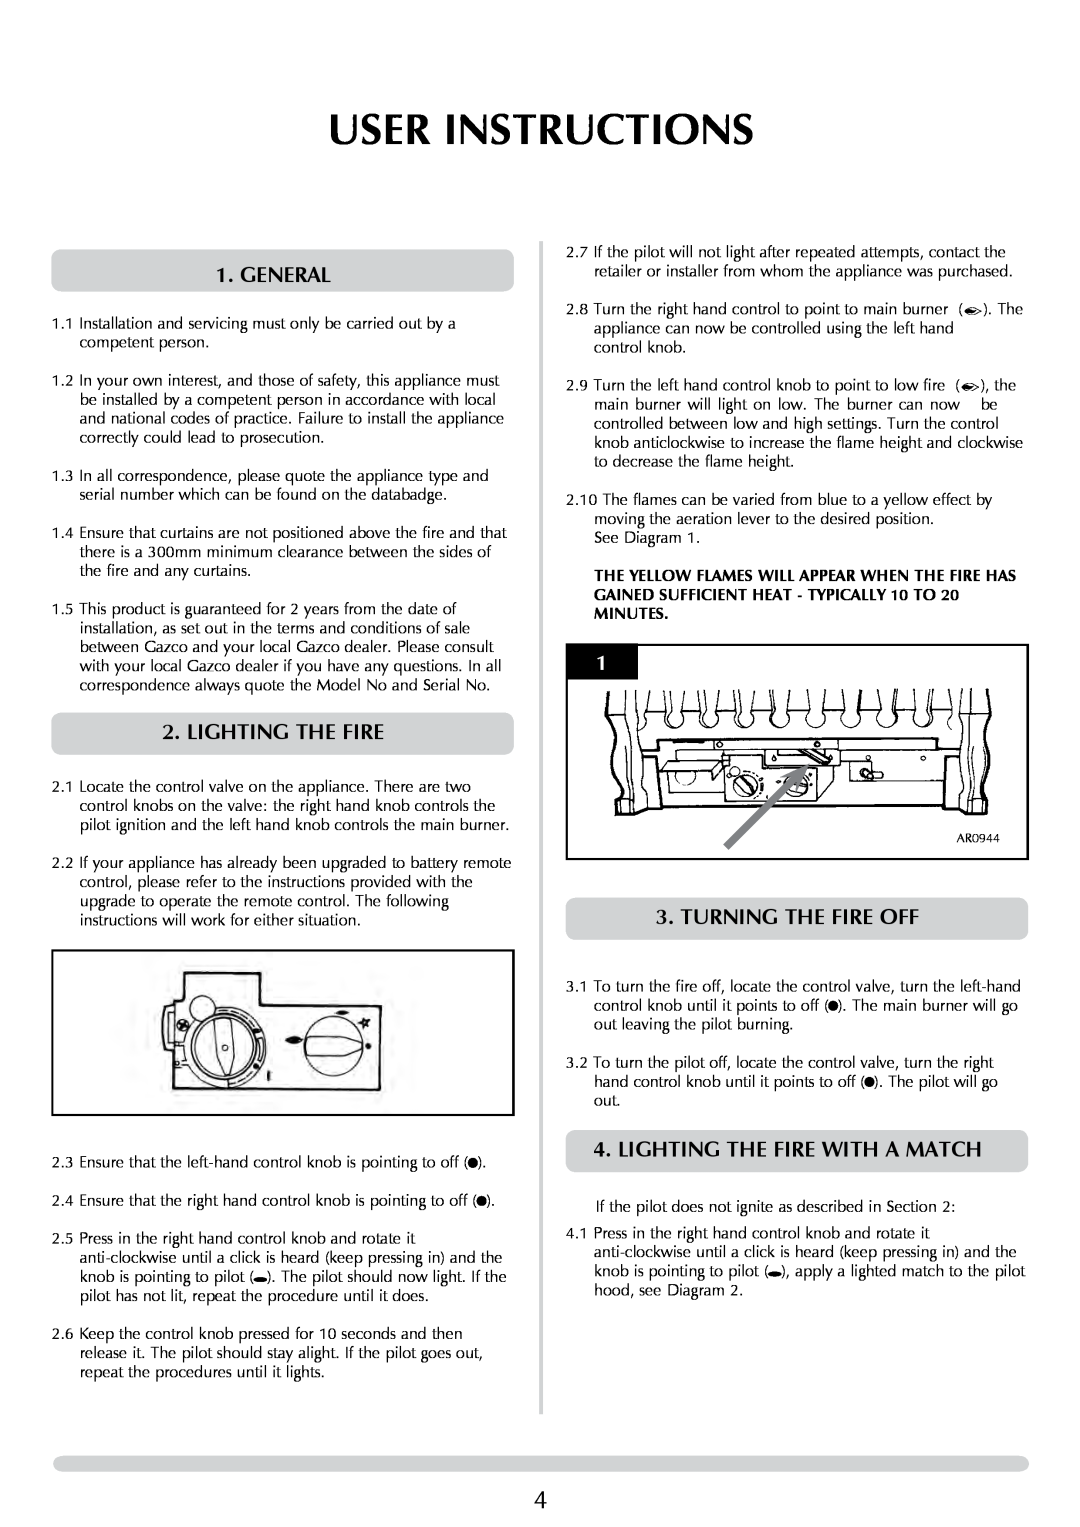 Stovax 8455 manual User Instructions, general, Turning The Fire Off, Lighting The Fire With A Match 